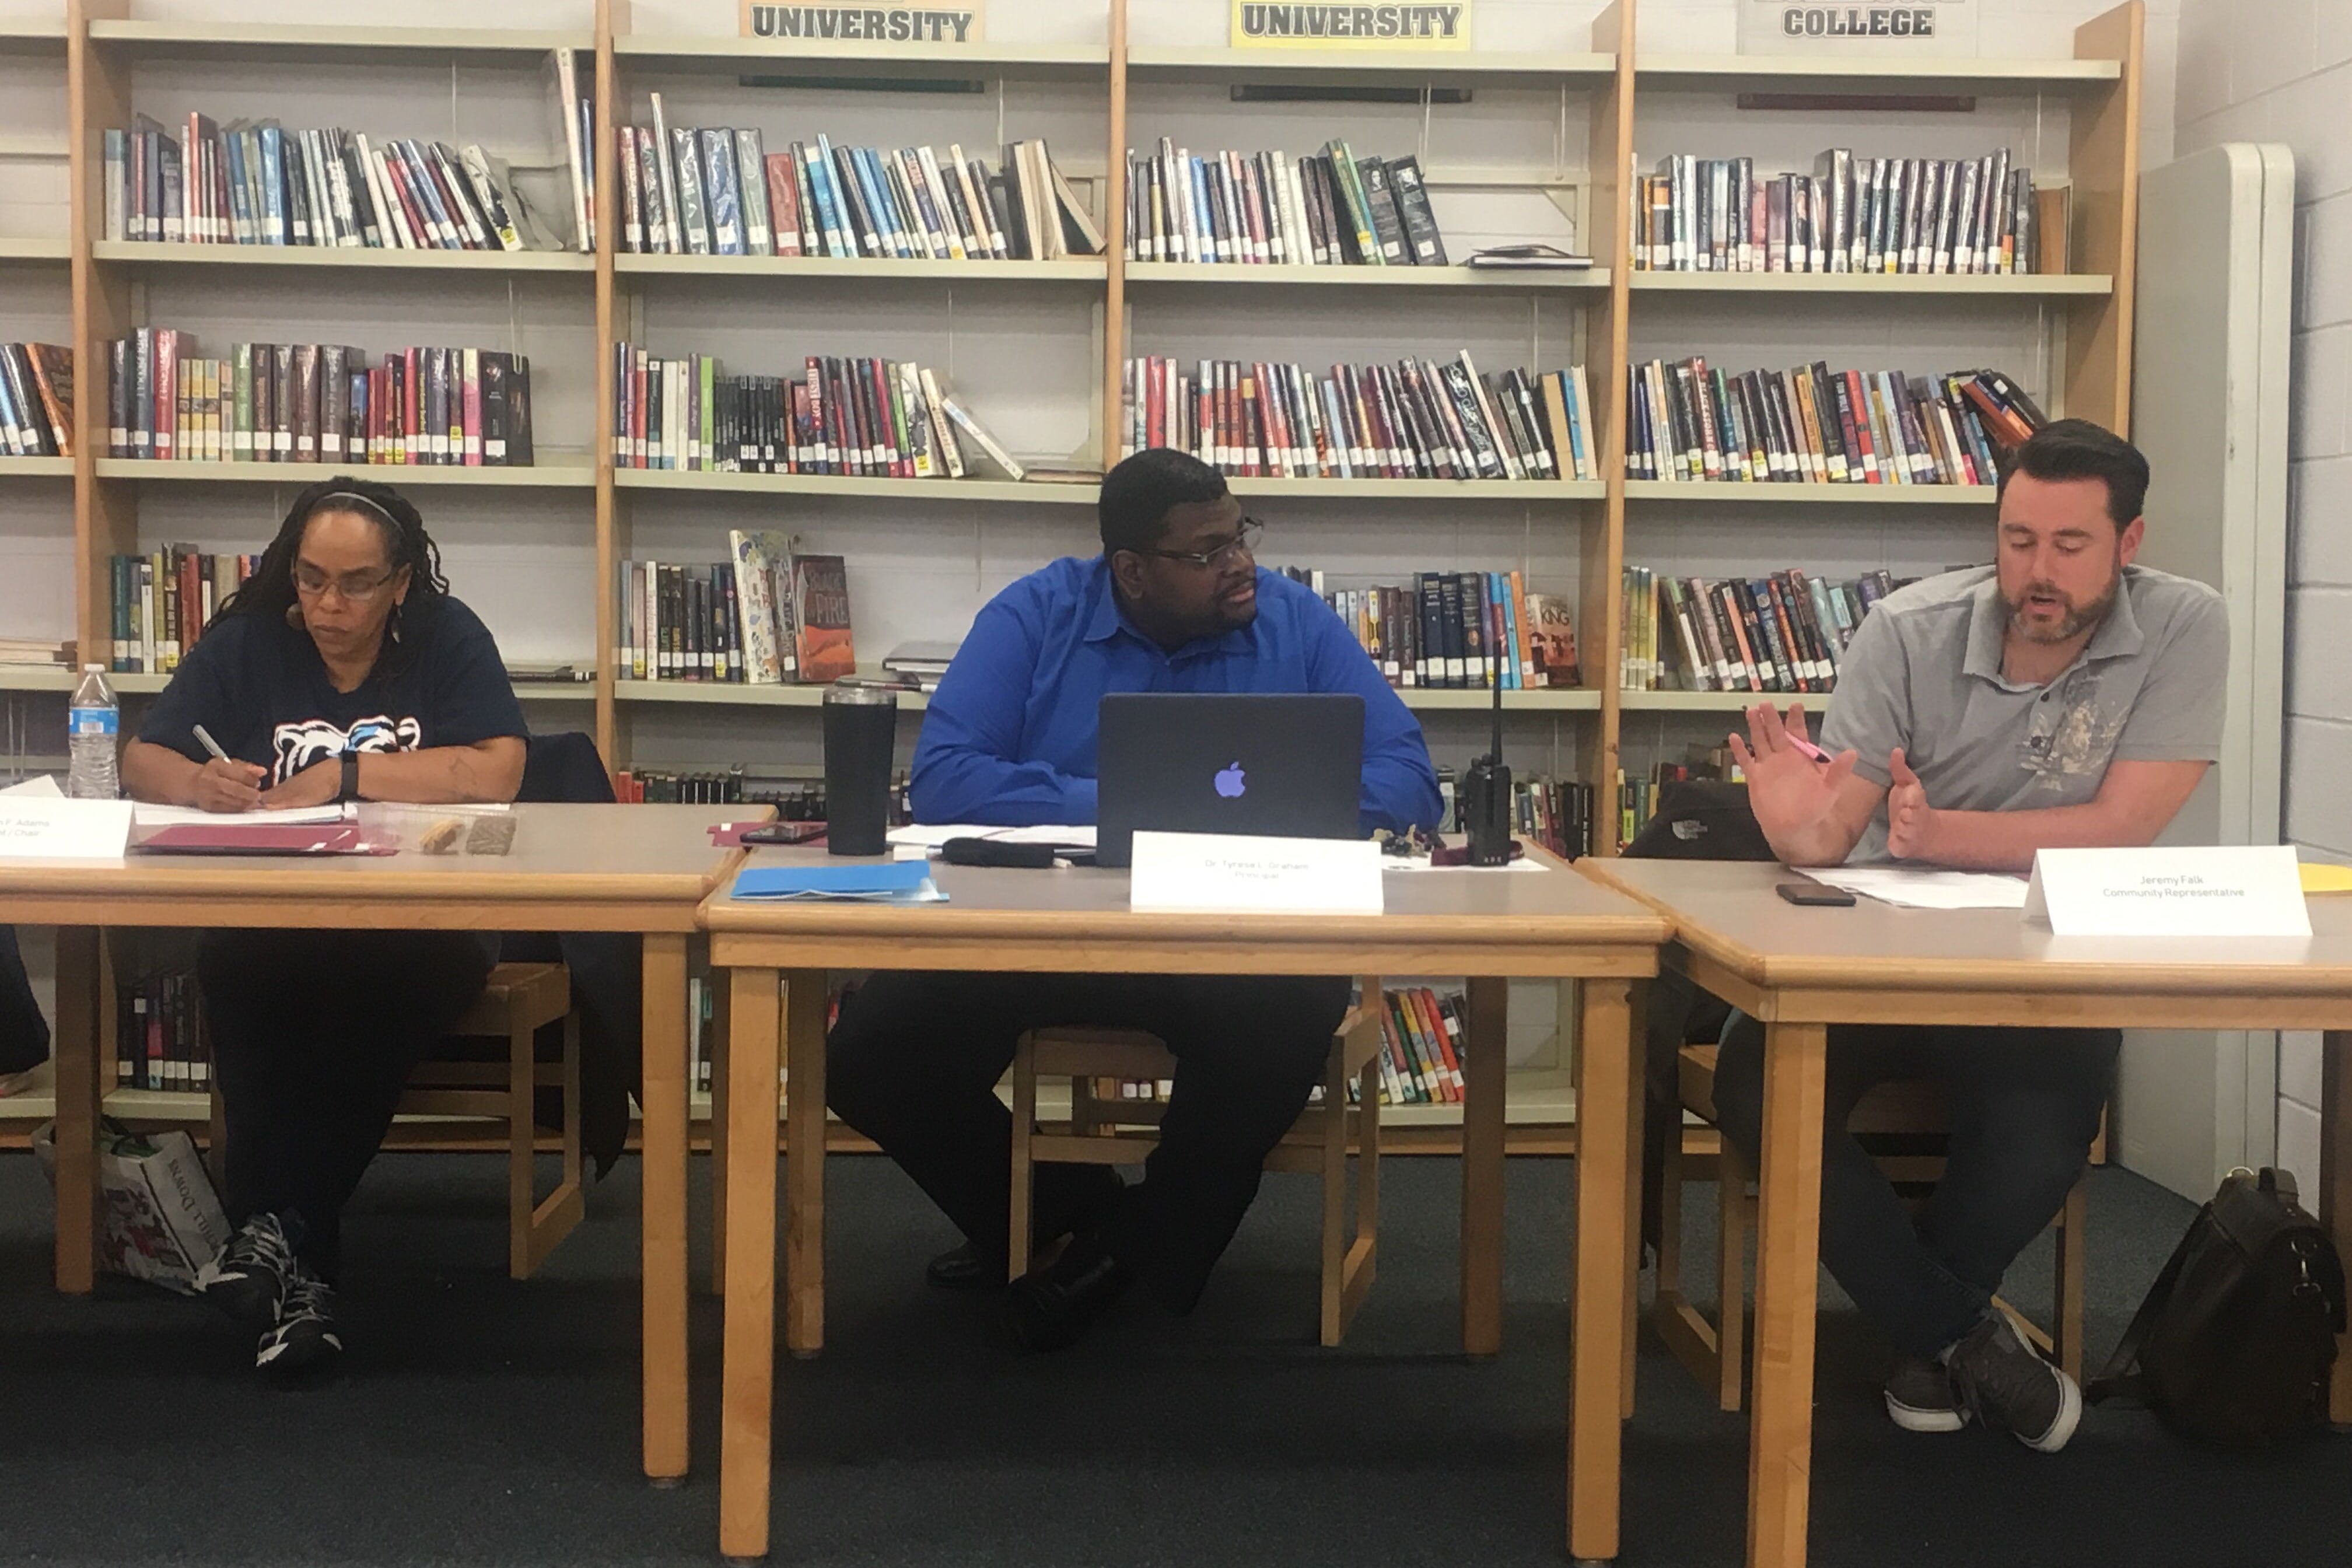 Three people sit at tables in a school library during a meeting in Chicago.